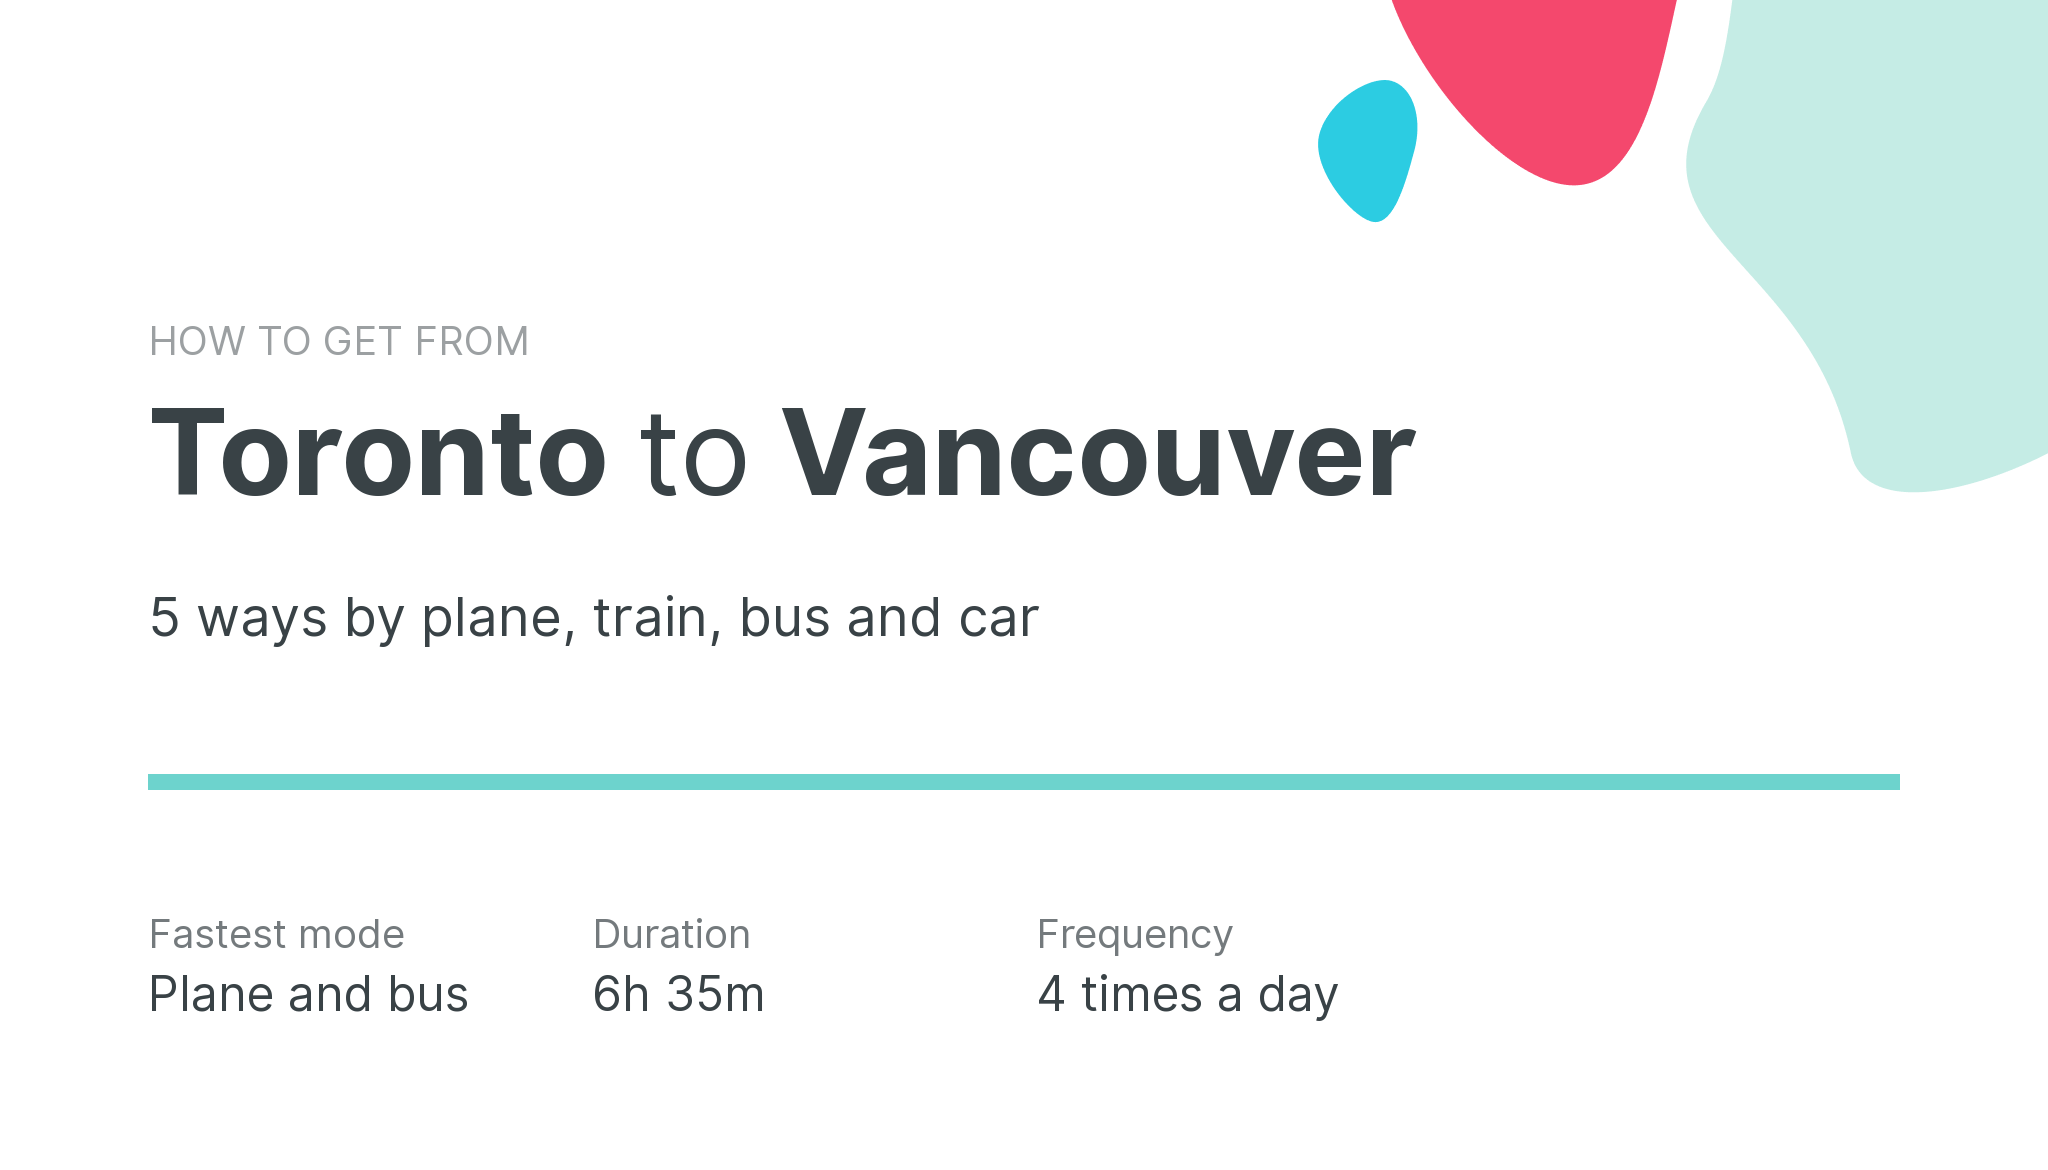 How do I get from Toronto to Vancouver